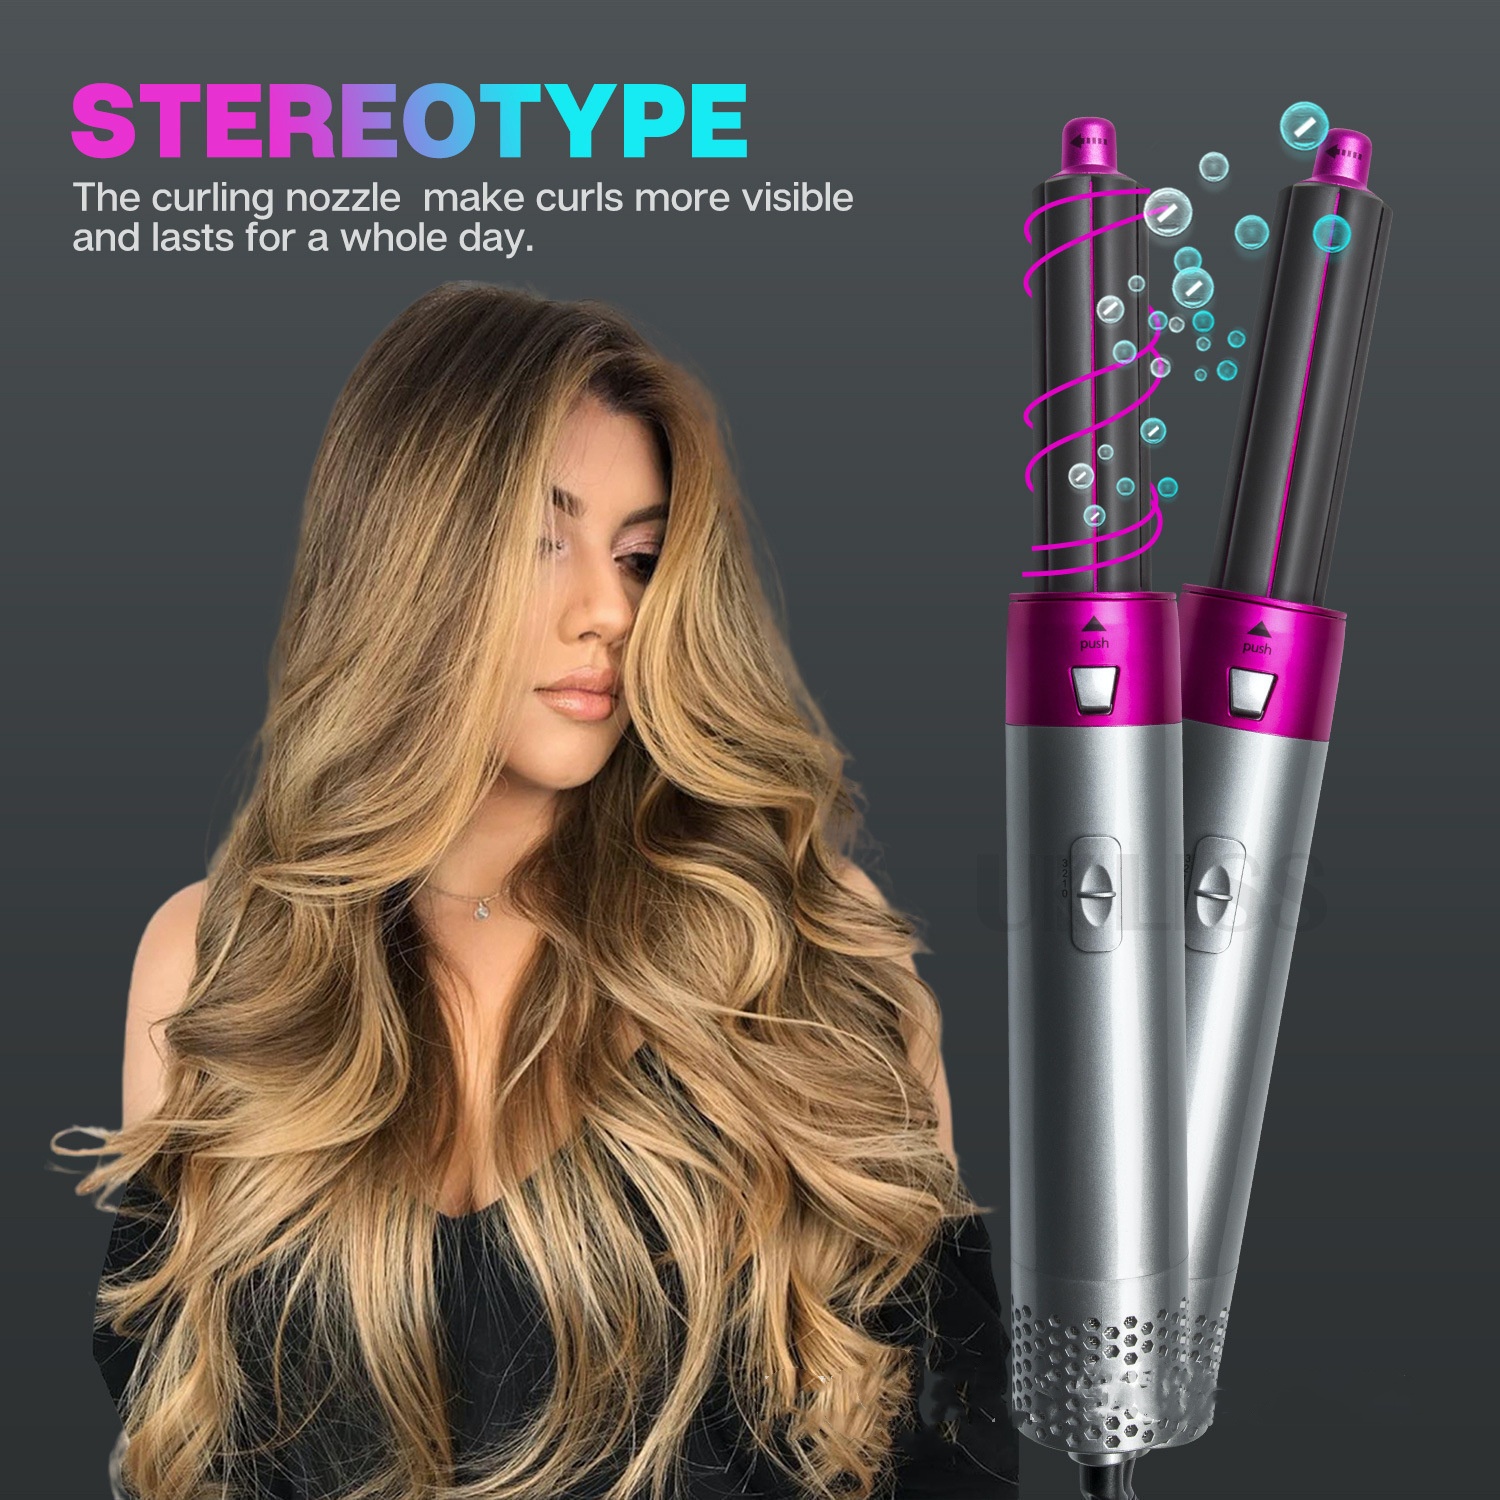 Hot comb 5-in-1 Hot Air Comb Aluminum straightener Automatic Curling iron Electric hair dryer